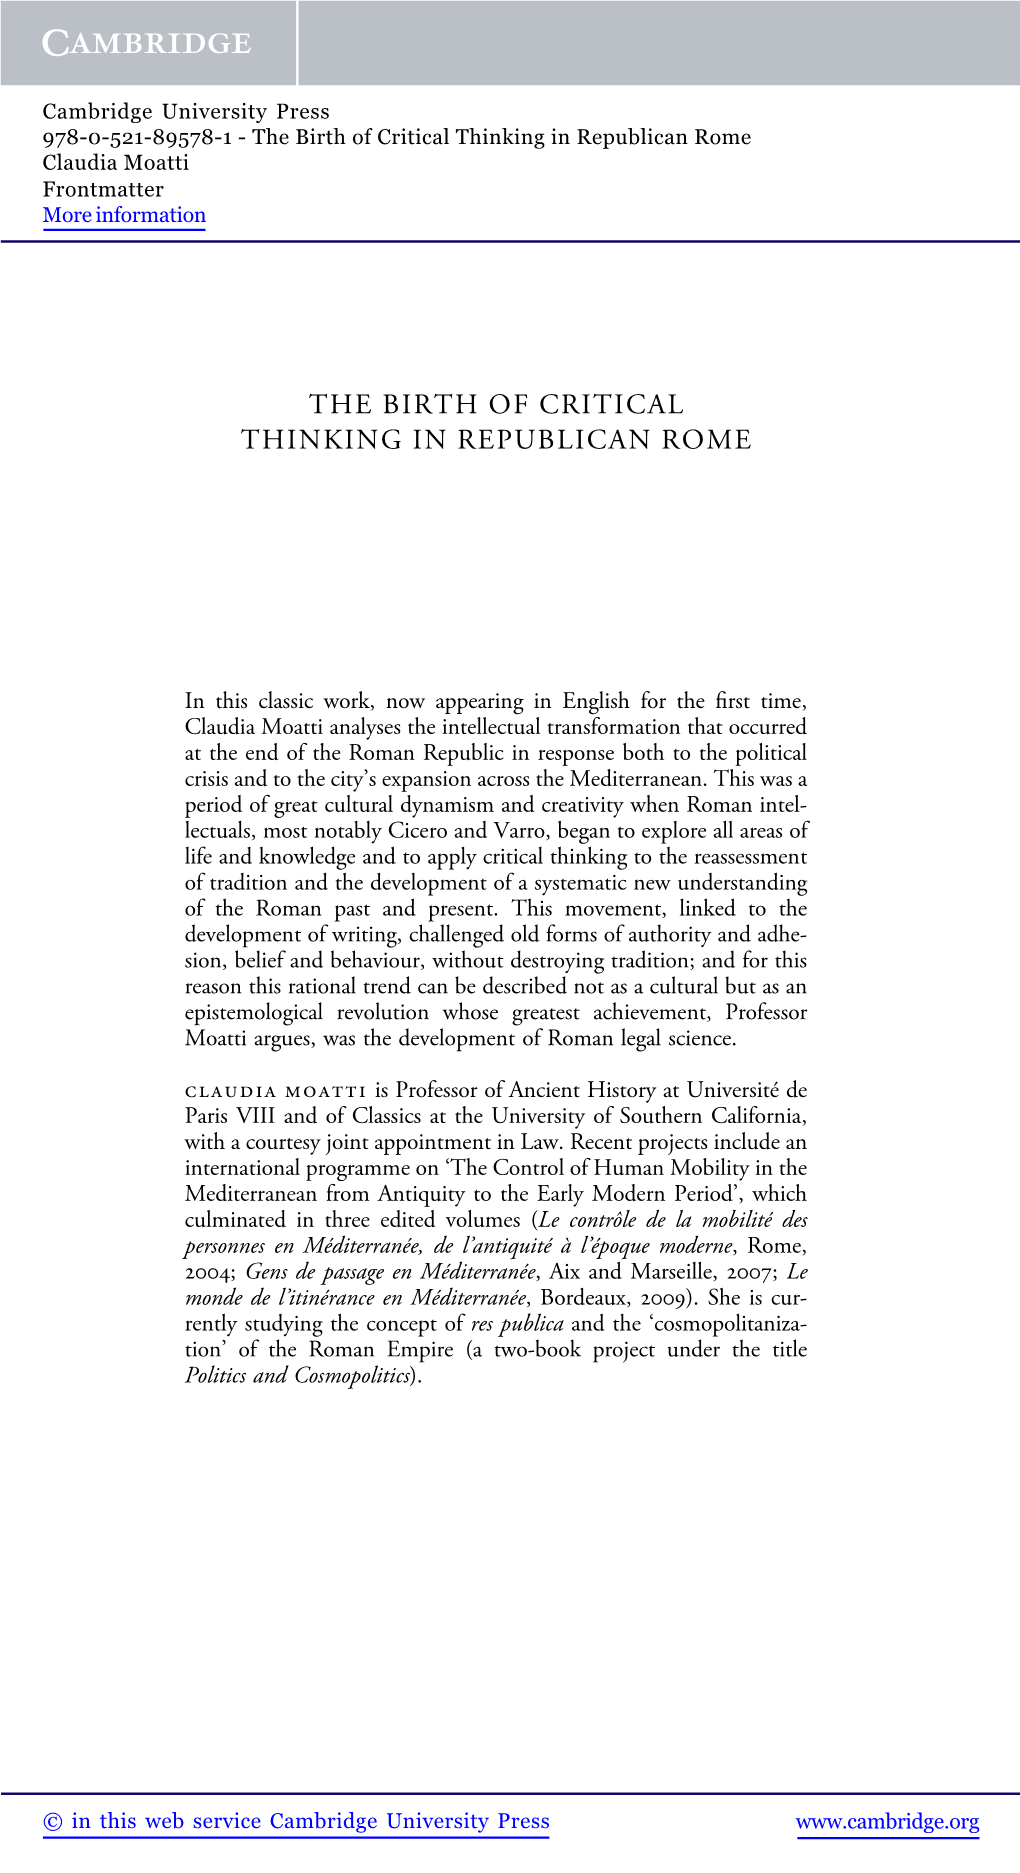 The Birth of Critical Thinking in Republican Rome Claudia Moatti Frontmatter More Information